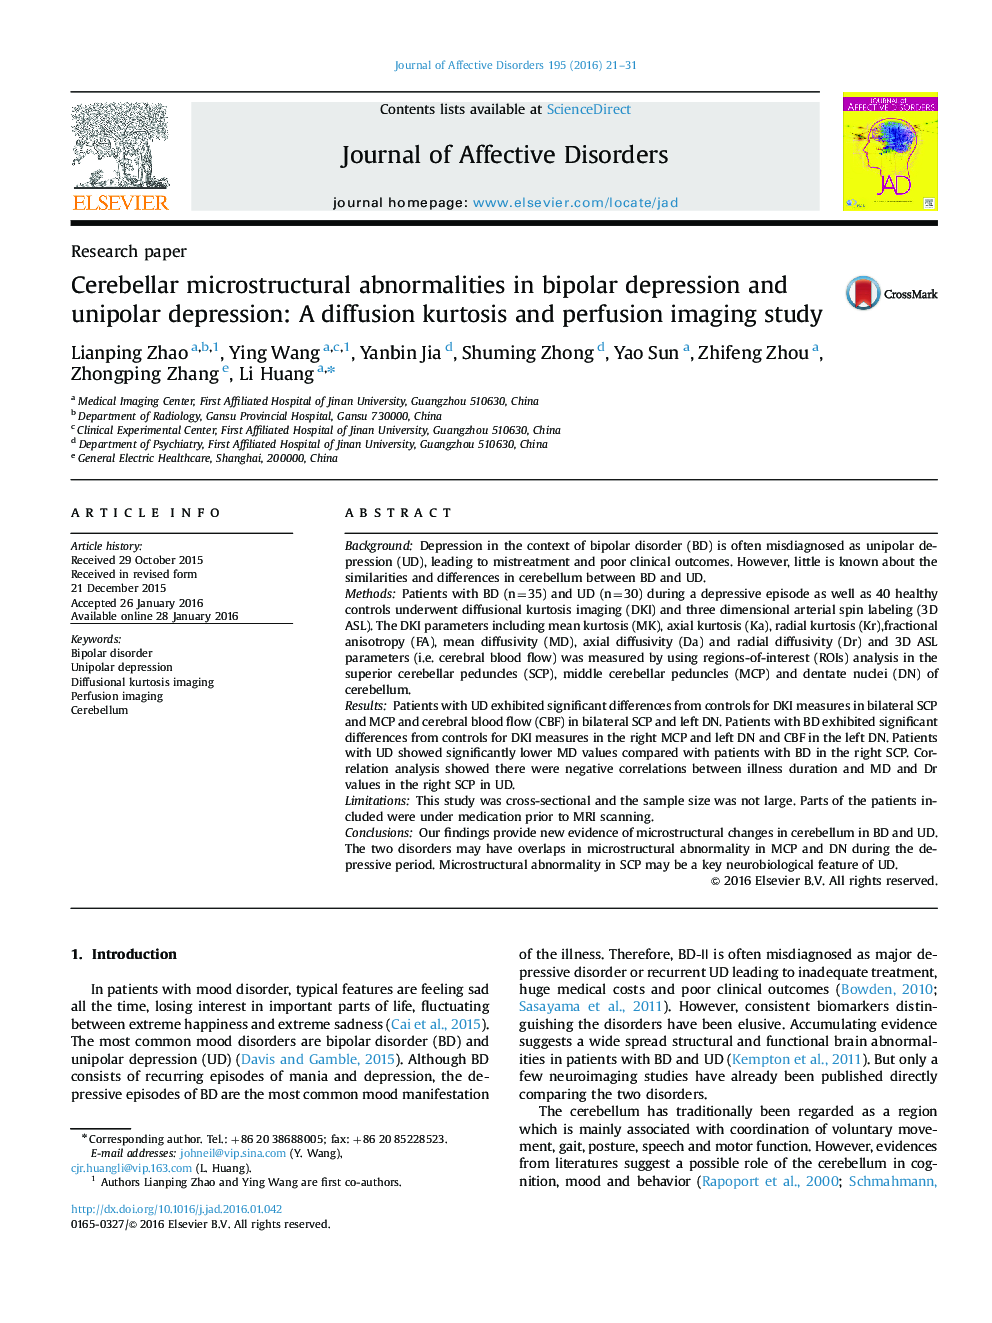 Research paperCerebellar microstructural abnormalities in bipolar depression and unipolar depression: A diffusion kurtosis and perfusion imaging study